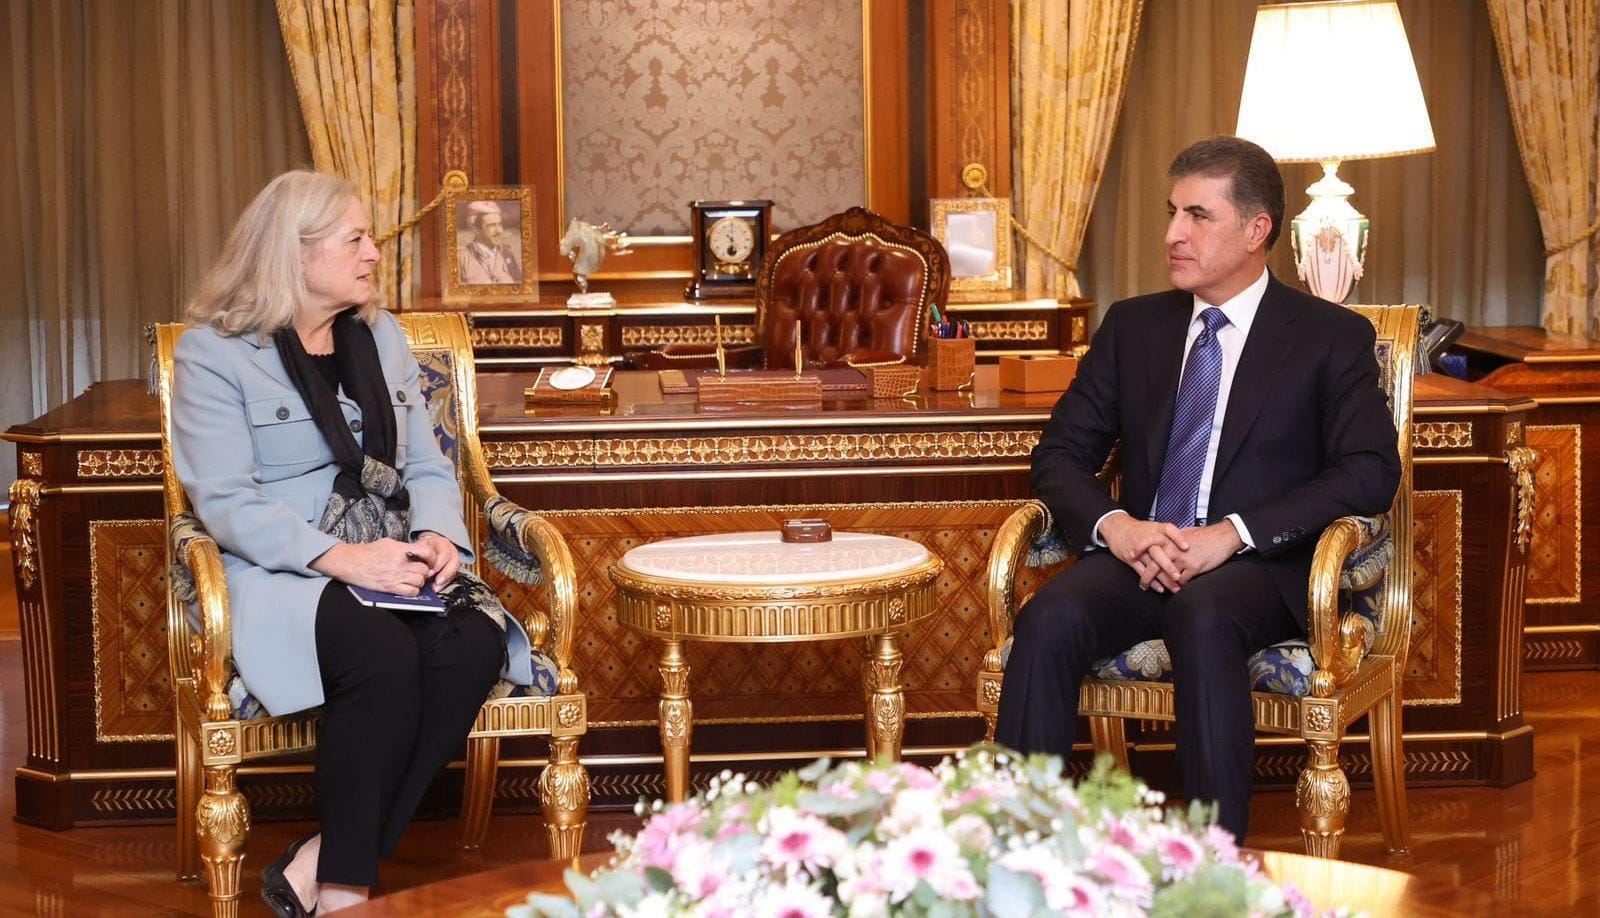 Kurdistan’s Presidency meets US Ambassador to discuss Iraqi political situation and Regional elections